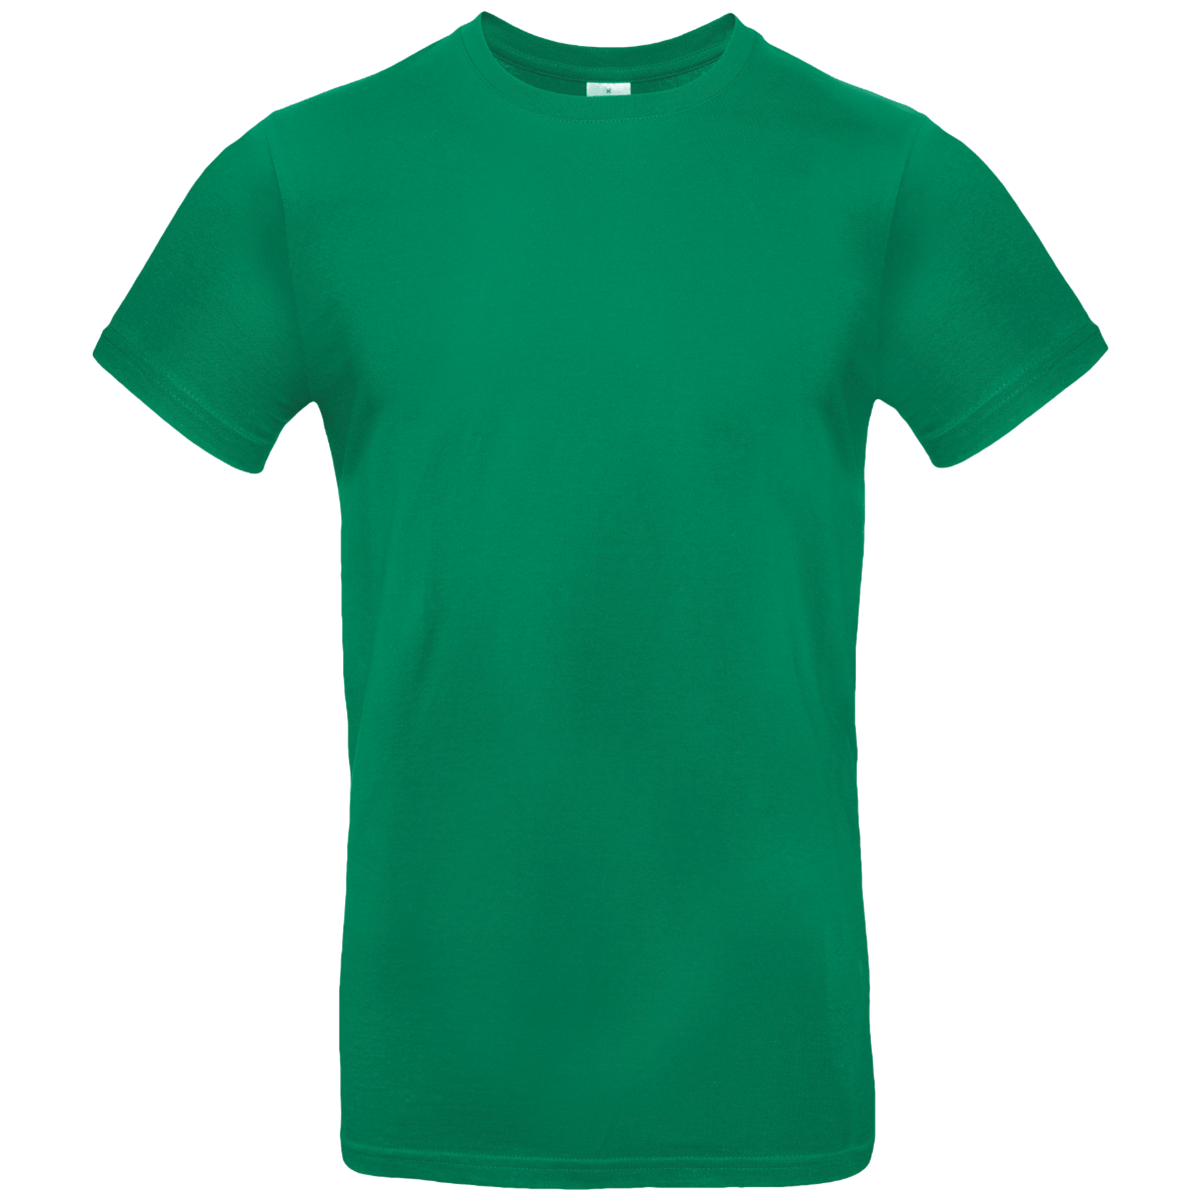 Tee-Shirt Homme Personnalisable Sur Tunetoo Kelly Green